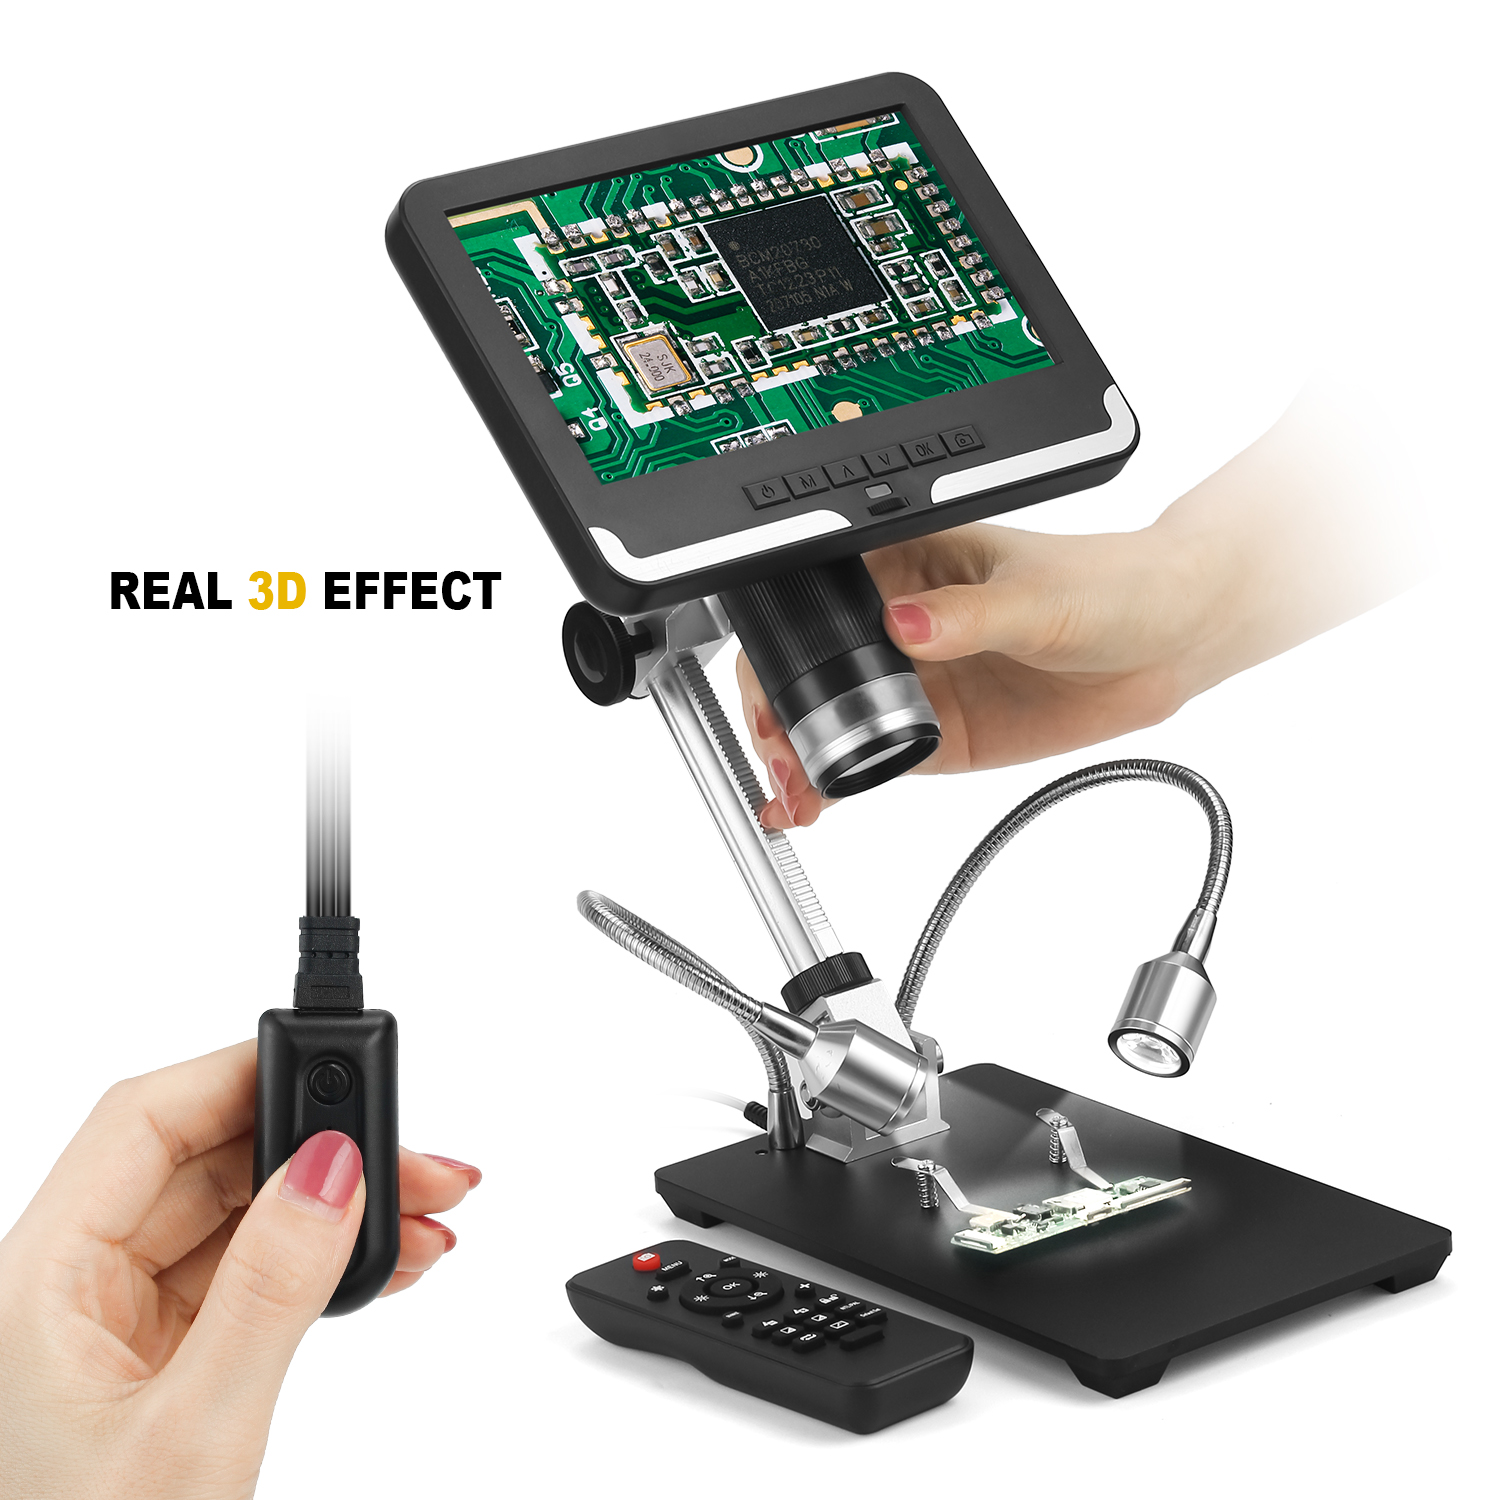 Andonstar-AD206-1080P-3D-Digital-Microscope-Soldering-Microscope-for-Phone-Repairing-SMD--SMT-1593356-1